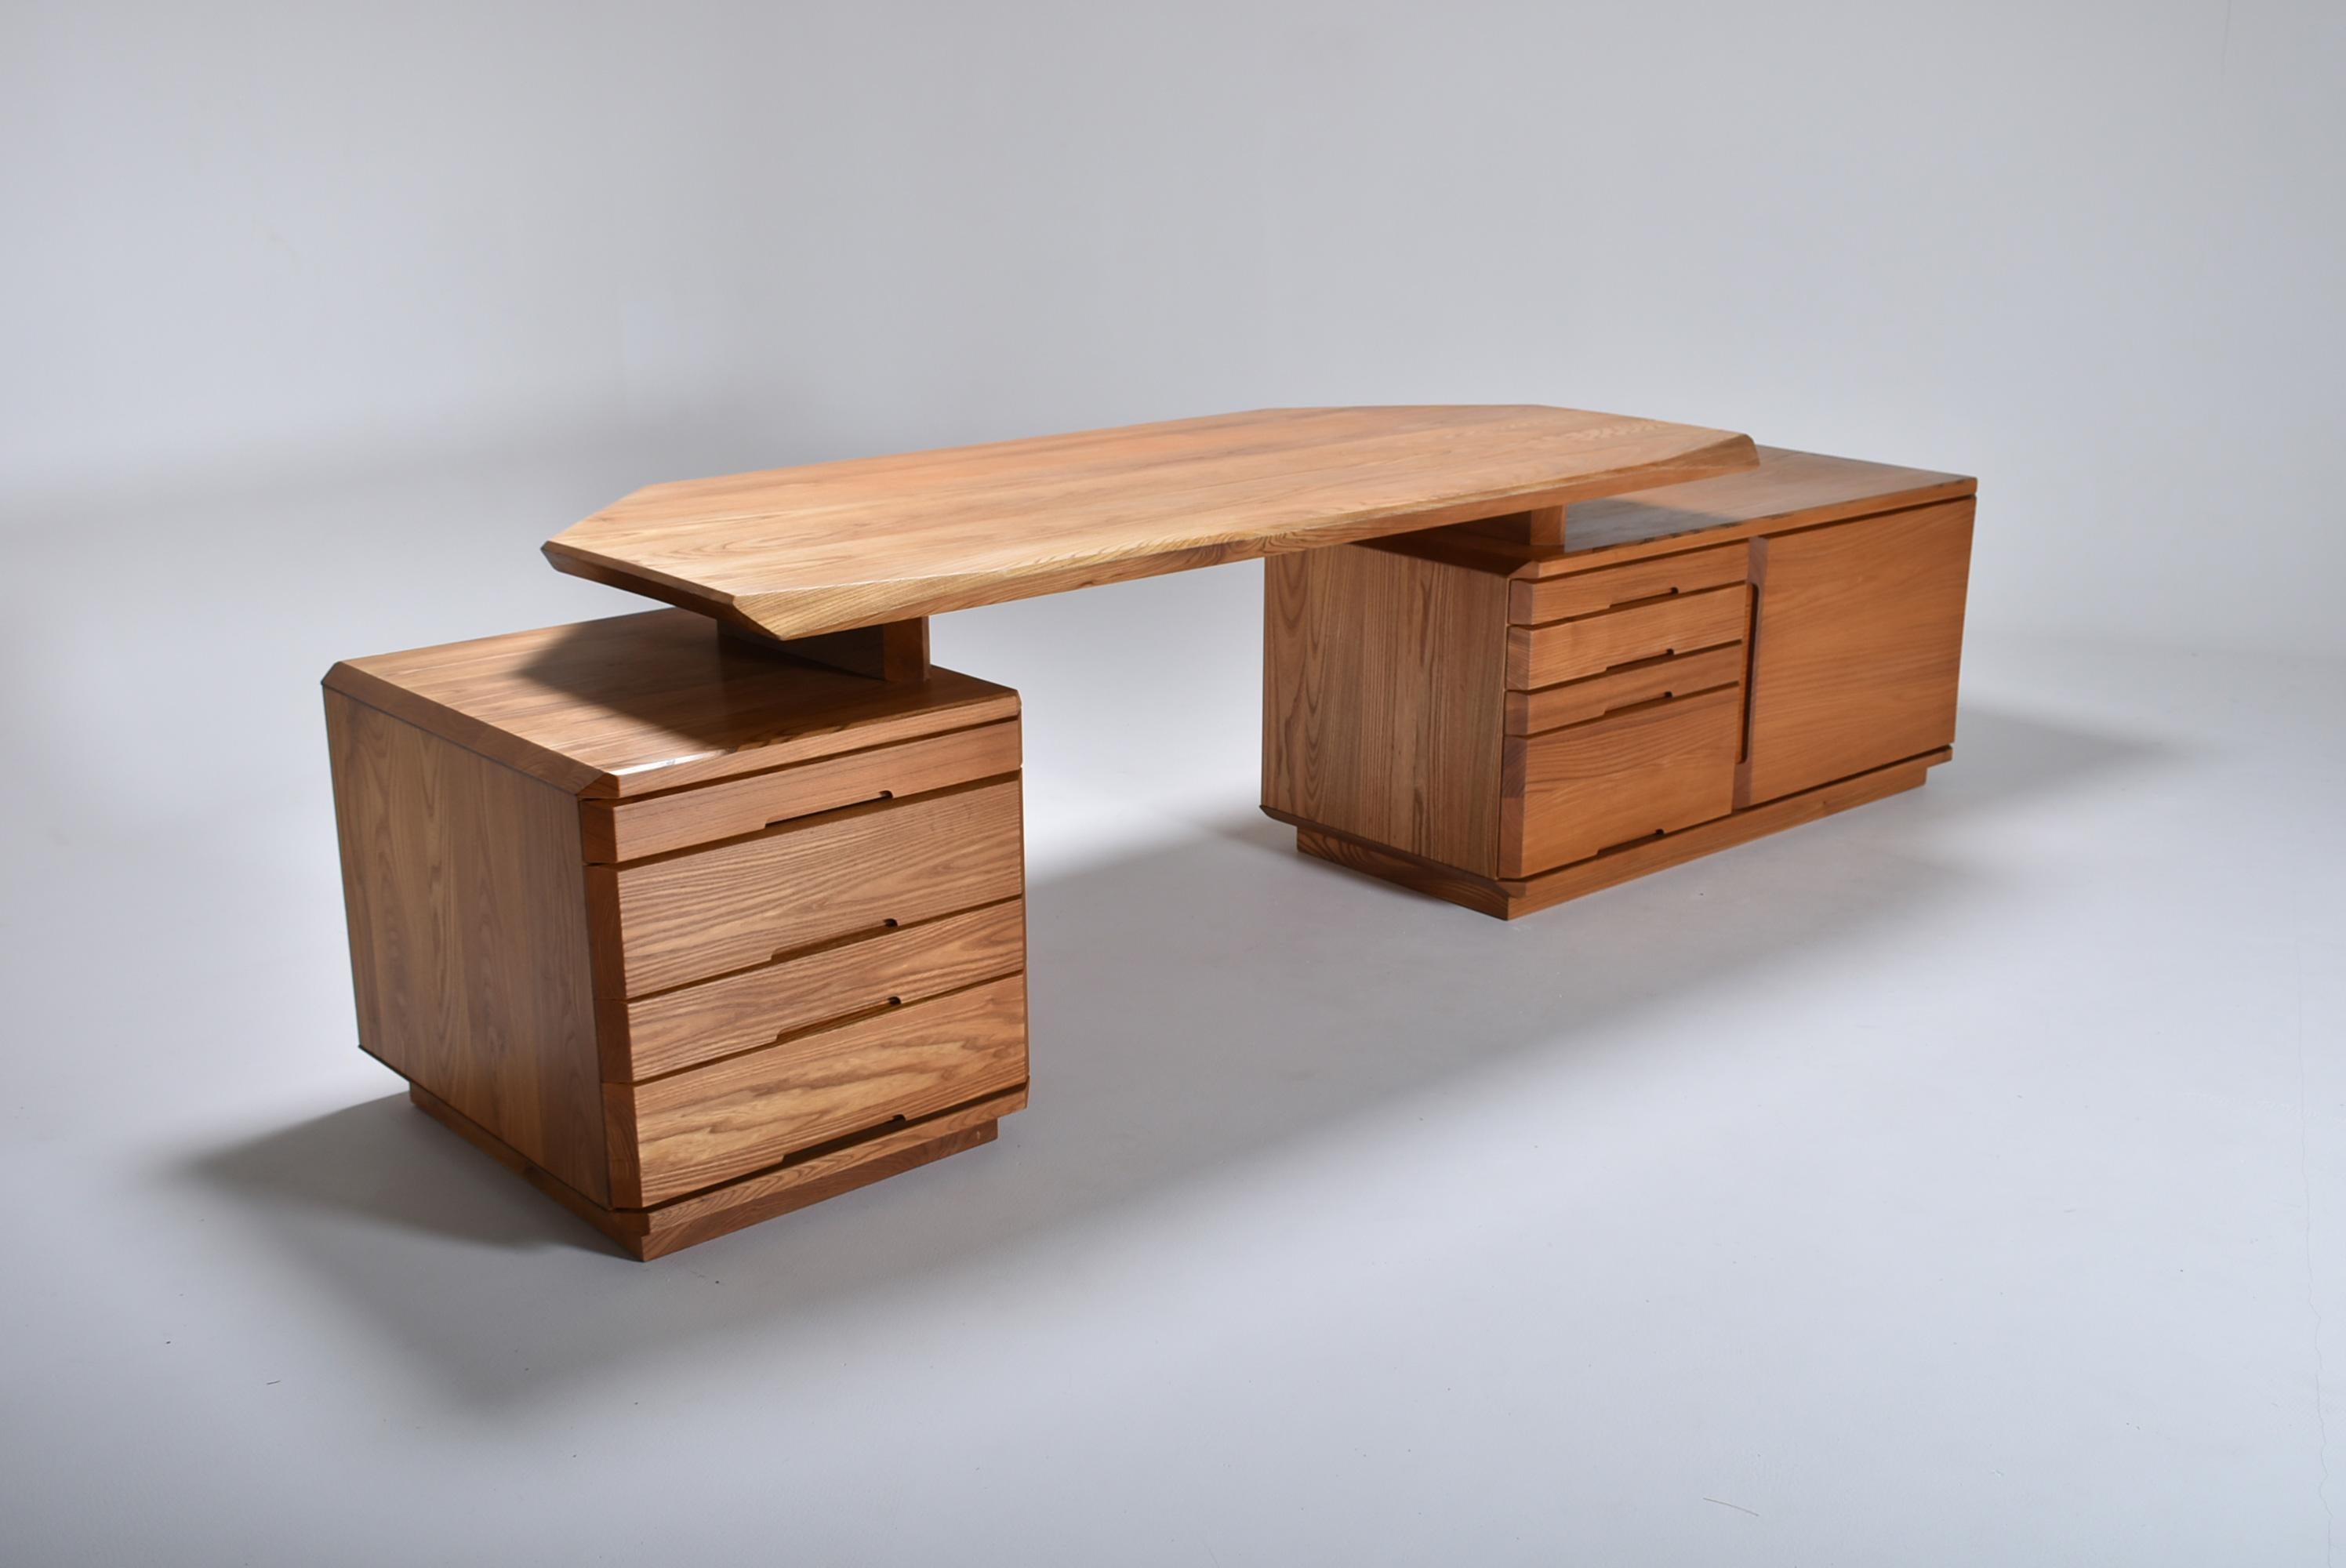 Mid-Century Modern solid elm desk B40 by the French designer Pierre Chapo, France.
This model is the much sought after B40, with one cabinet (R40B) and one commode (R40G).
The top has nice edges and is bevelled for a better writing